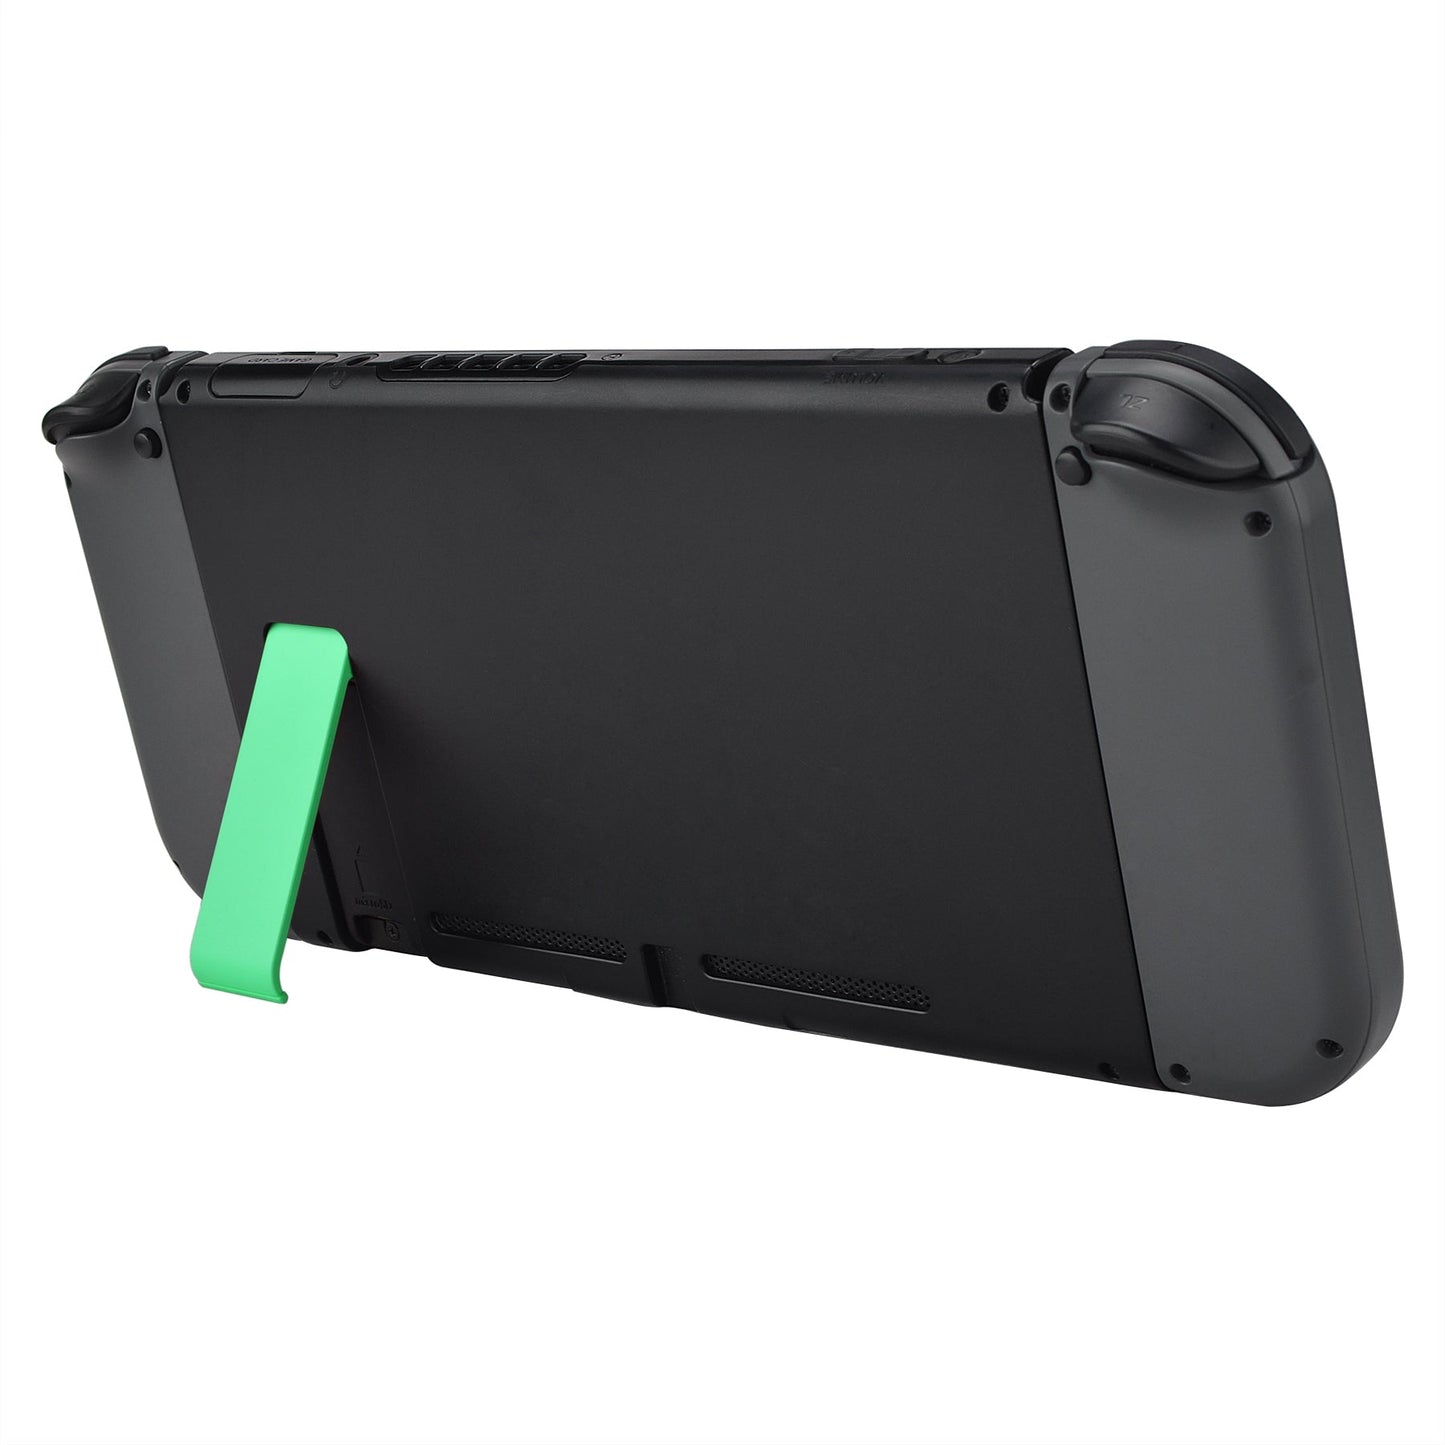 eXtremeRate Retail 2 Set of Mint Green Replacement Kickstand for Nintendo Switch Console, Back Bracket Holder Kick Stand for Nintendo Switch - Console NOT Included - AJ404